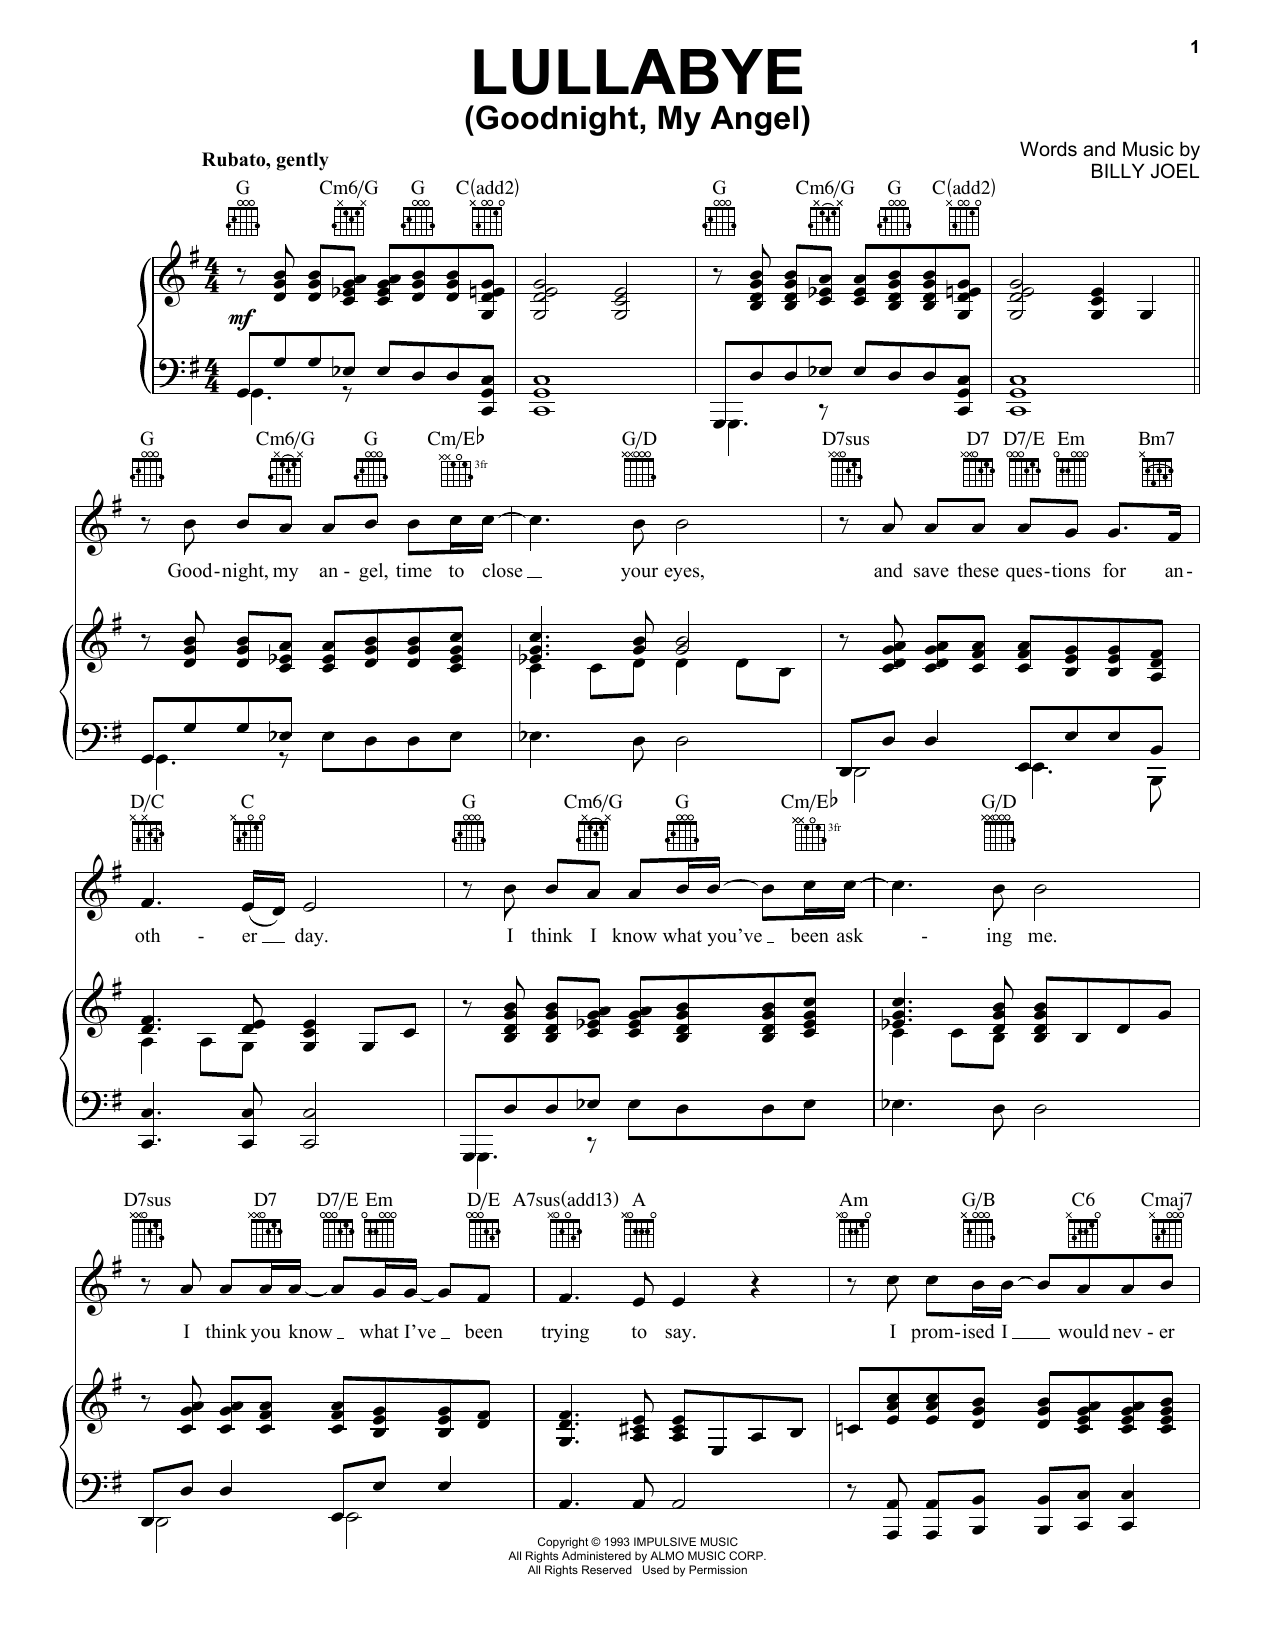 Durante ~ crisis Judías verdes Billy Joel "Lullabye (Goodnight, My Angel)" Sheet Music PDF Notes, Chords |  Pop Score Piano, Vocal & Guitar (Right-Hand Melody) Download Printable.  SKU: 18283